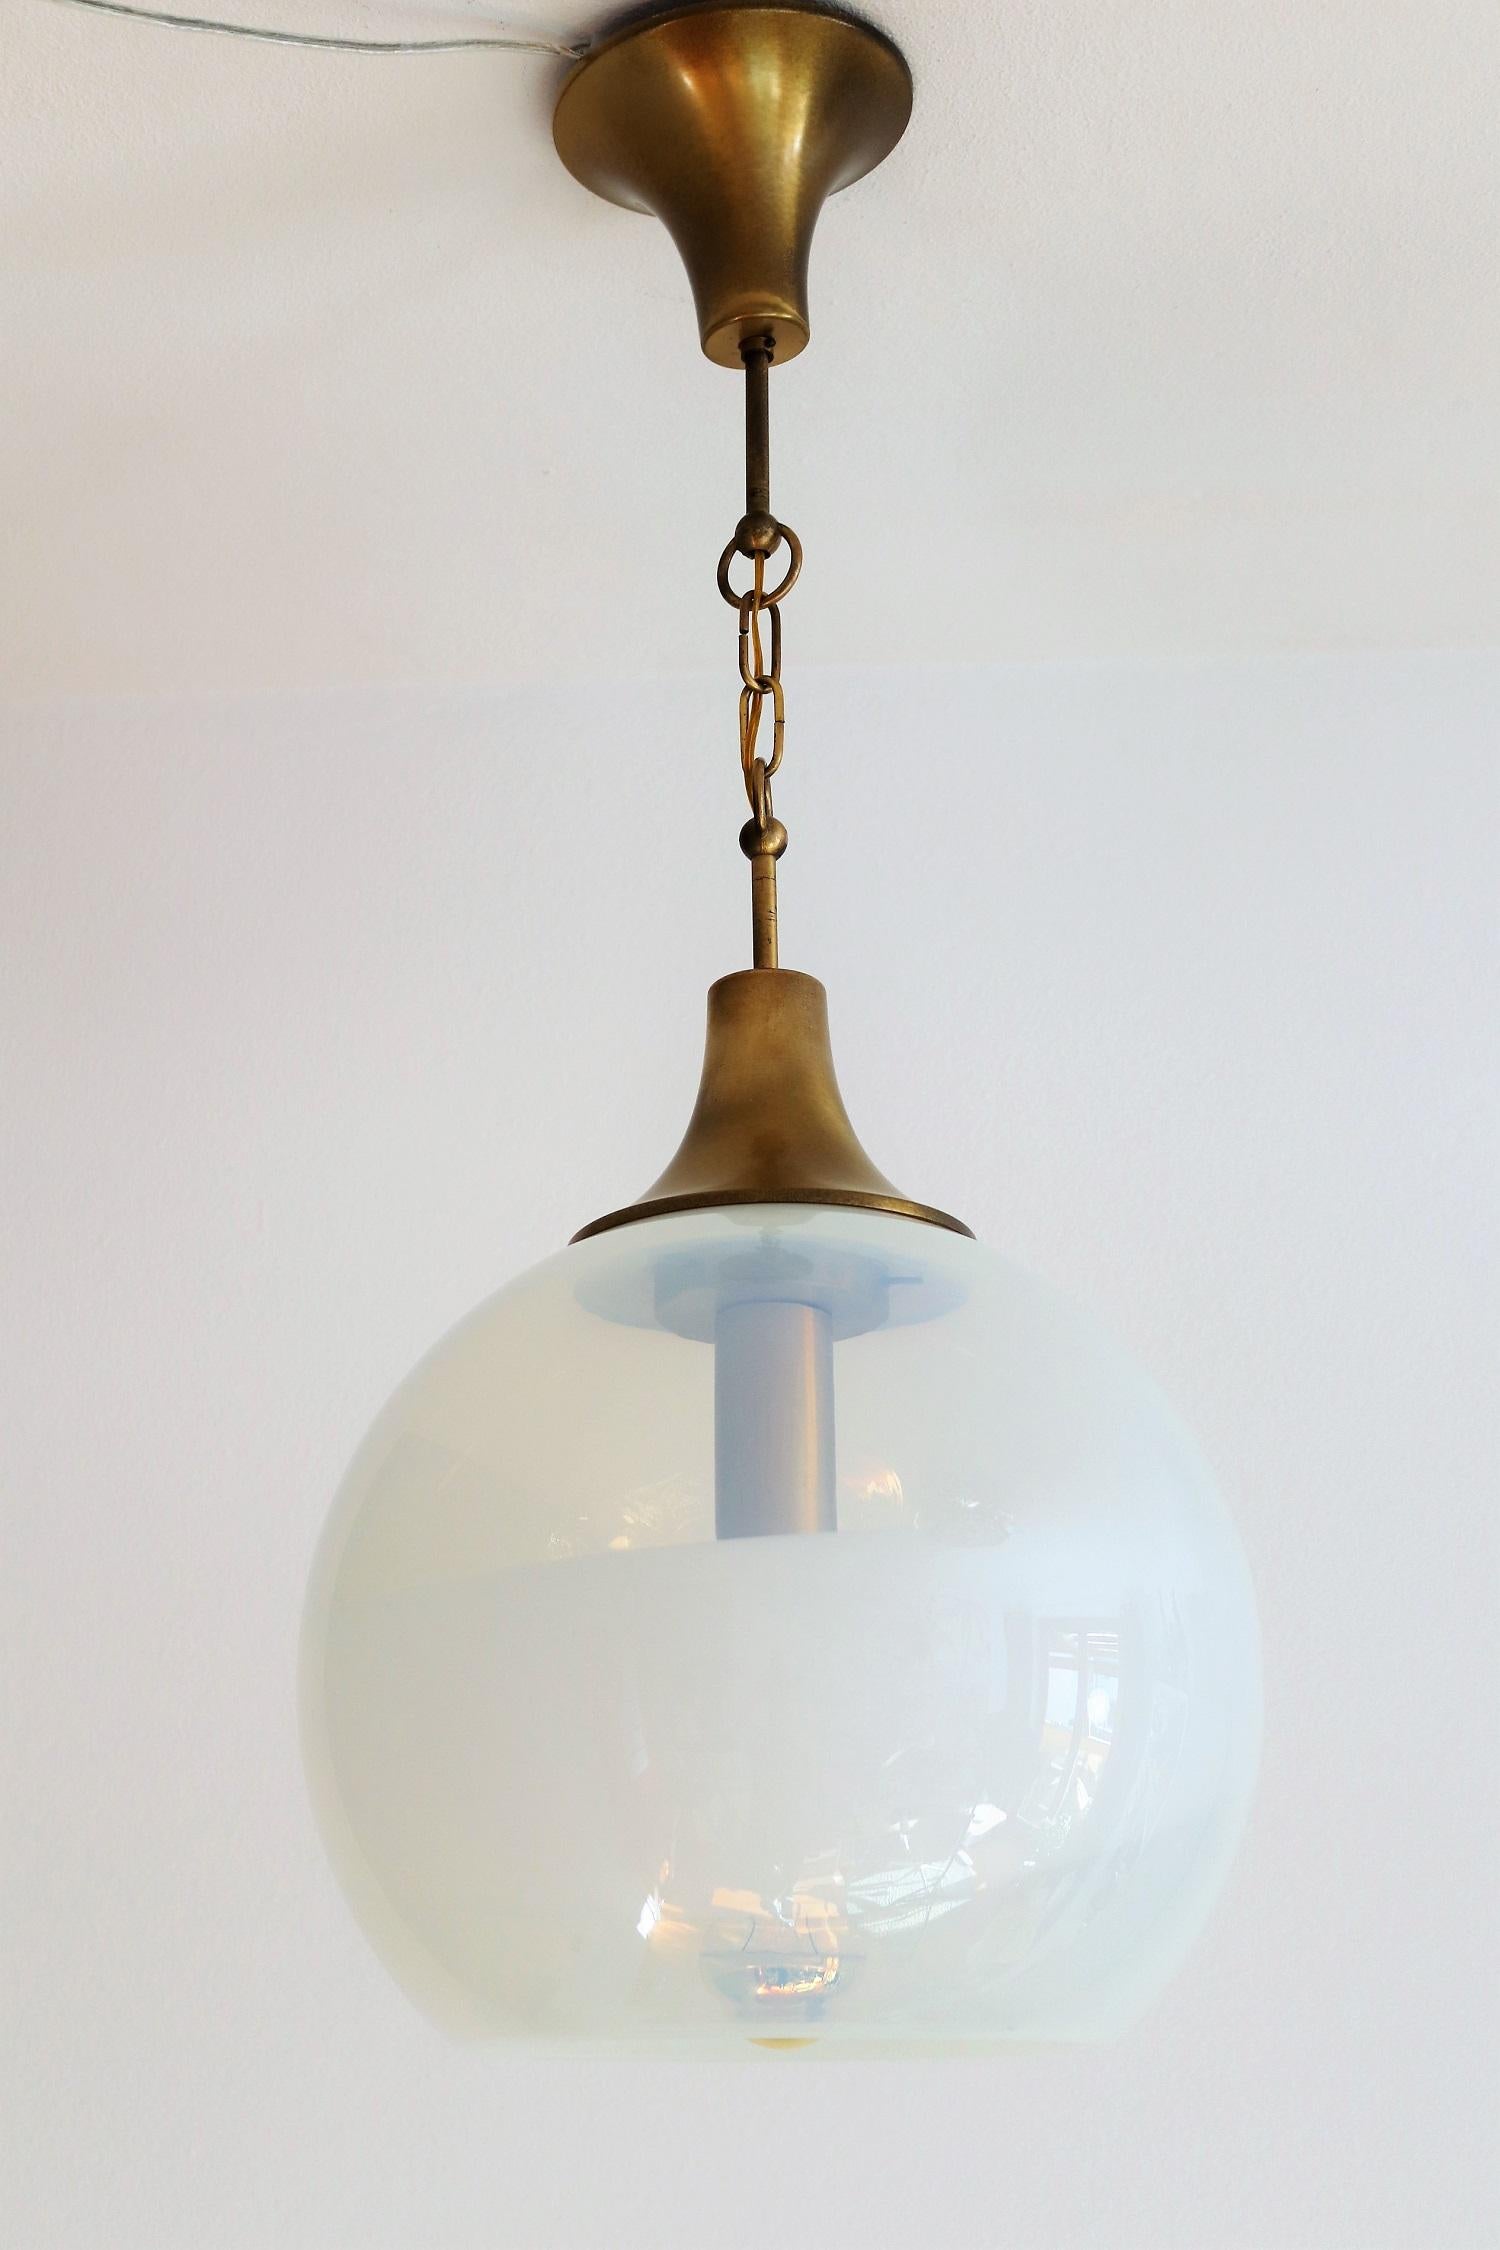 Gorgeous pendant lamp of Italian Production with magnificent opalescent glass globe and brass details.
Made in Italy, 1970s.
The glass globe of light creamy opalescent color has a large white stripe all around and gives together with the brass